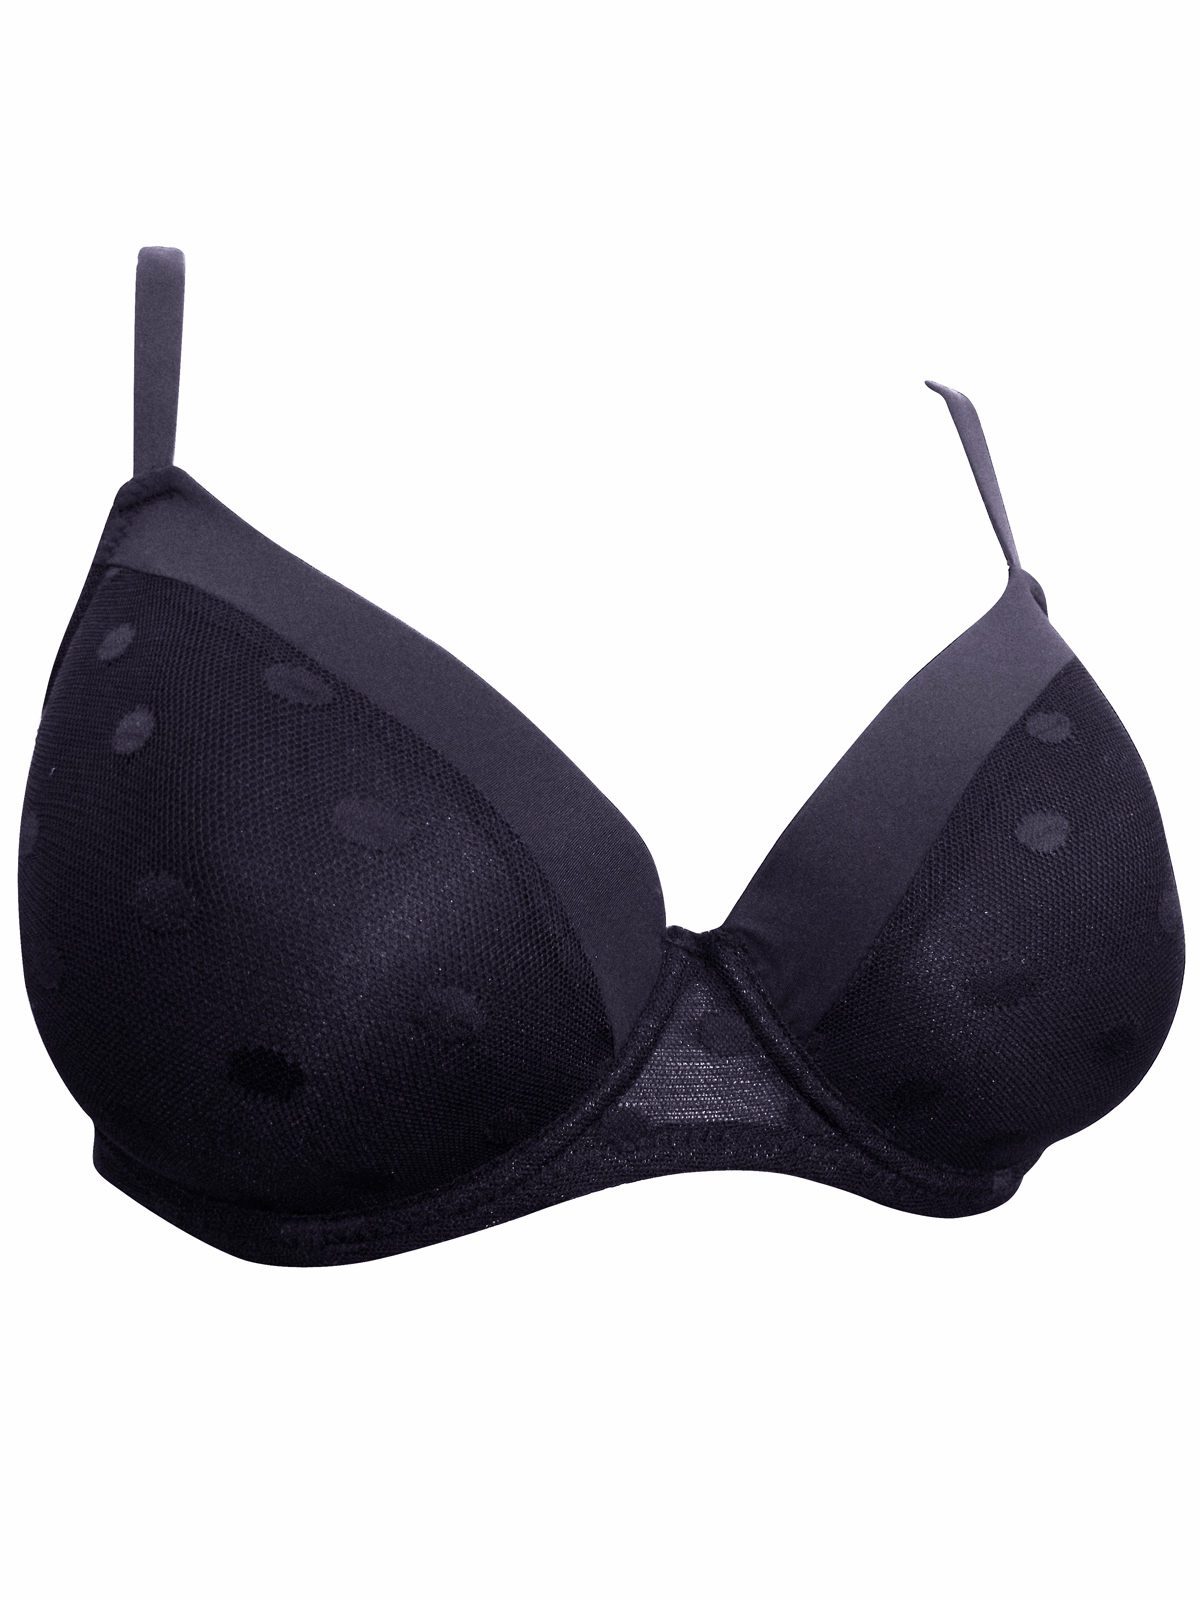 Trofe - - Trofe BLACK Spotted Mesh Padded Underwired Full Cup Bra ...